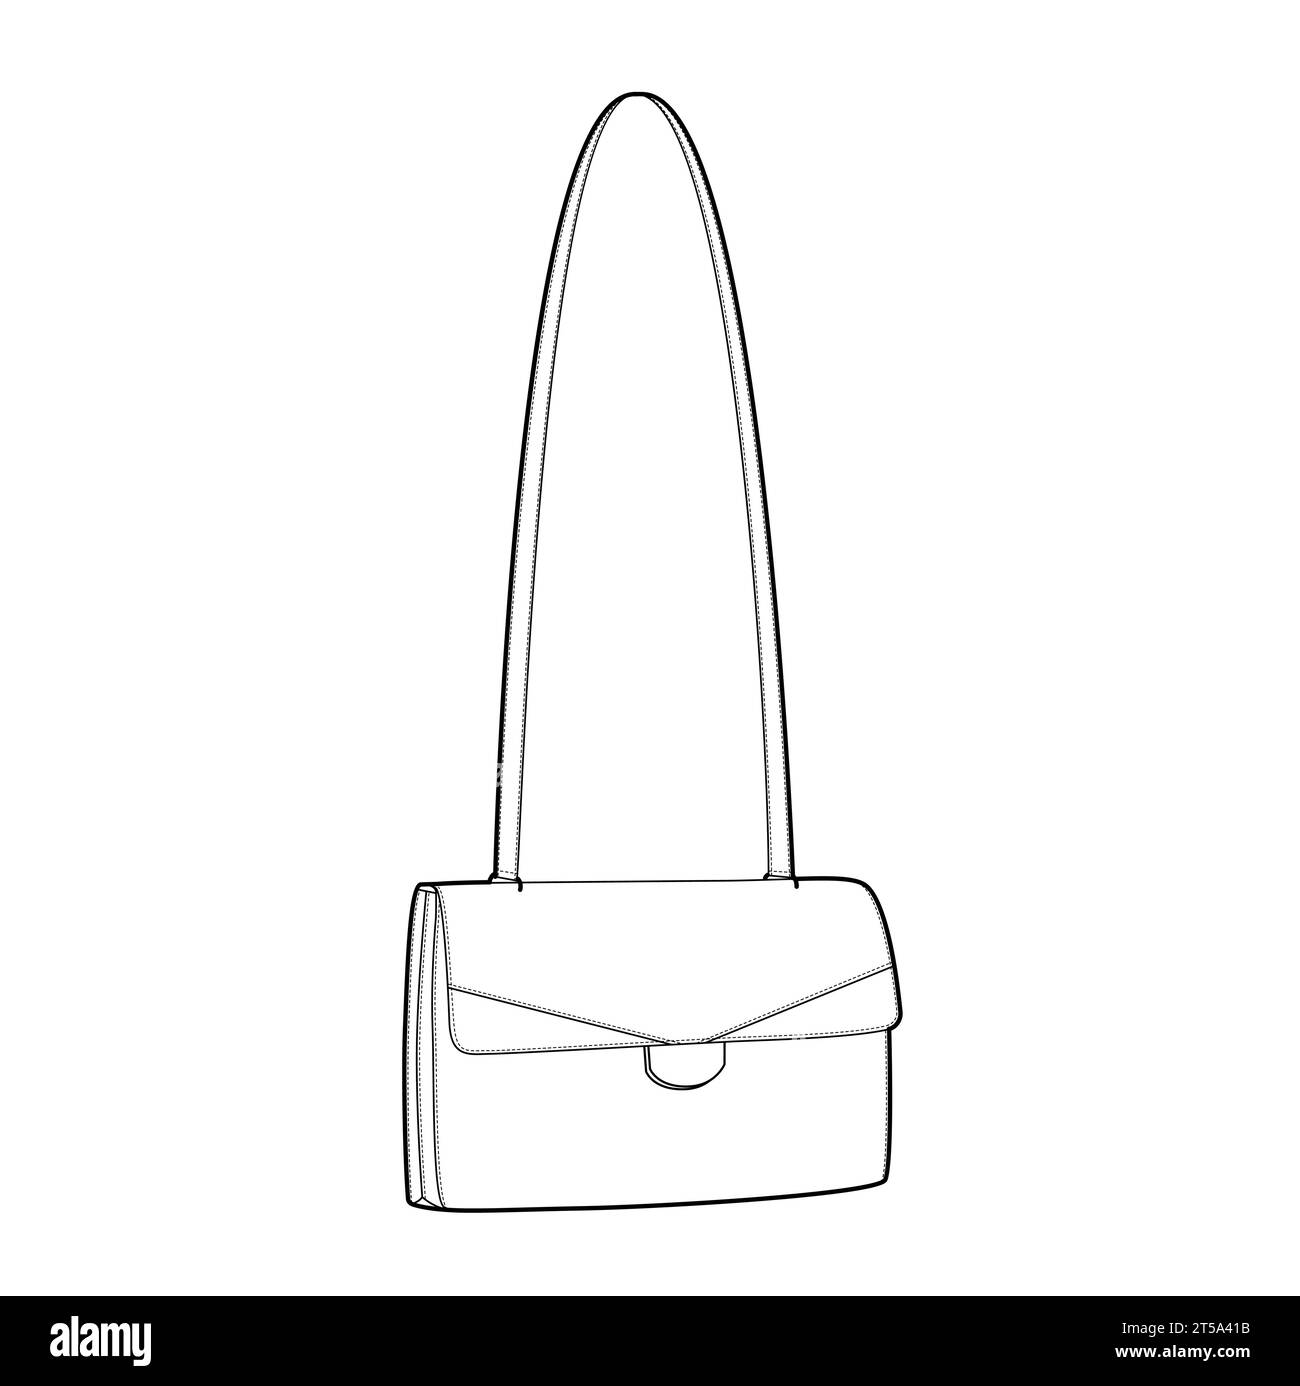 The 1970s Cross-Body Shoulder Bag. Fashion accessory technical illustration. Vector satchel front 3-4 view for Men, women, unisex style, flat handbag CAD mockup sketch outline isolated Stock Vector